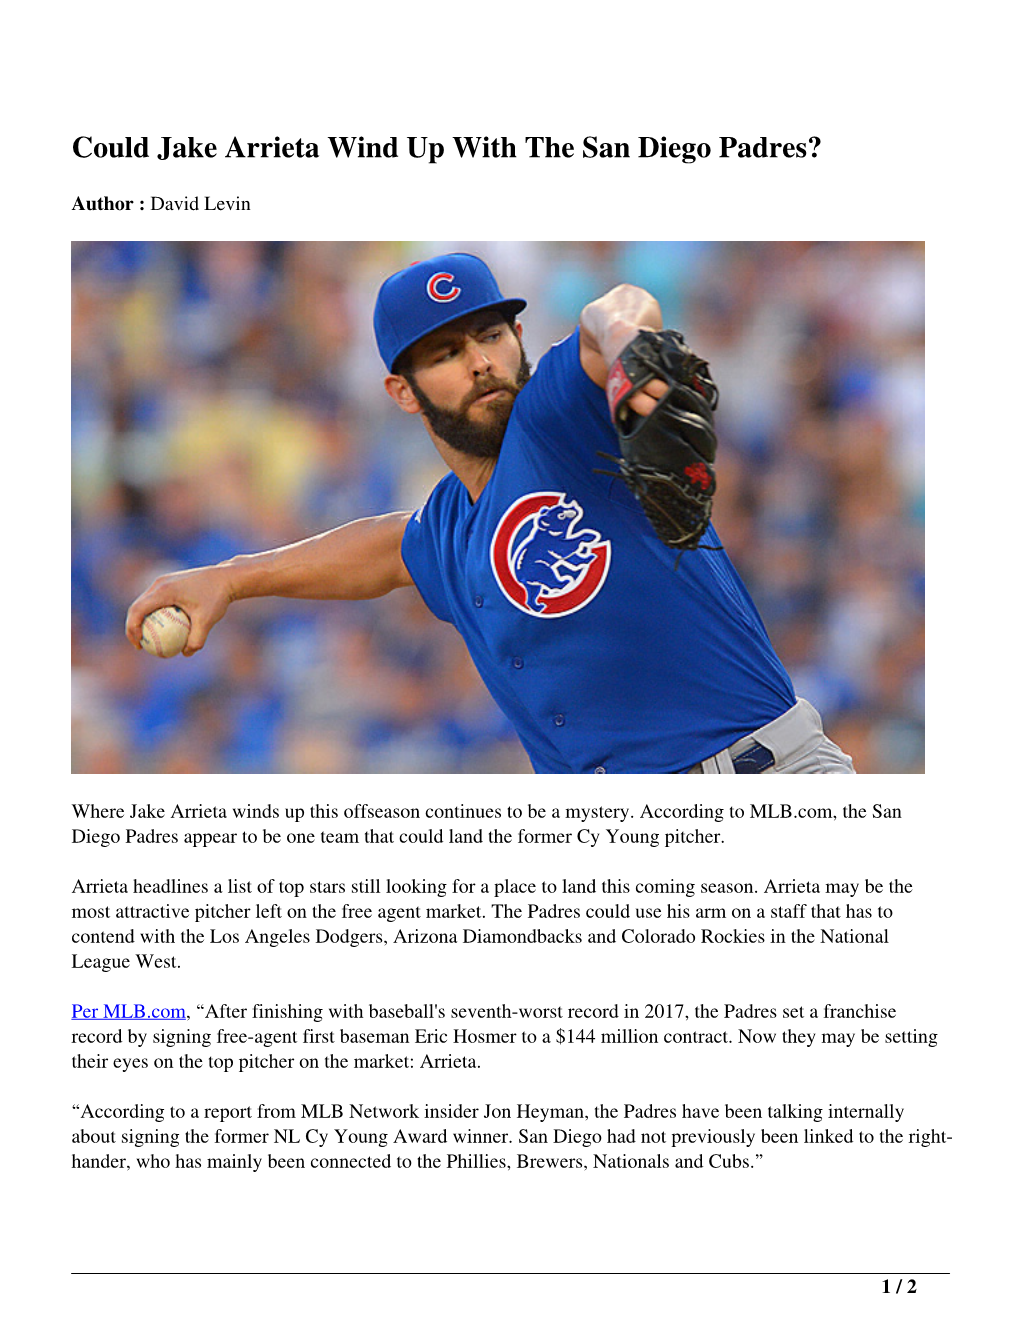 Could Jake Arrieta Wind up with the San Diego Padres?